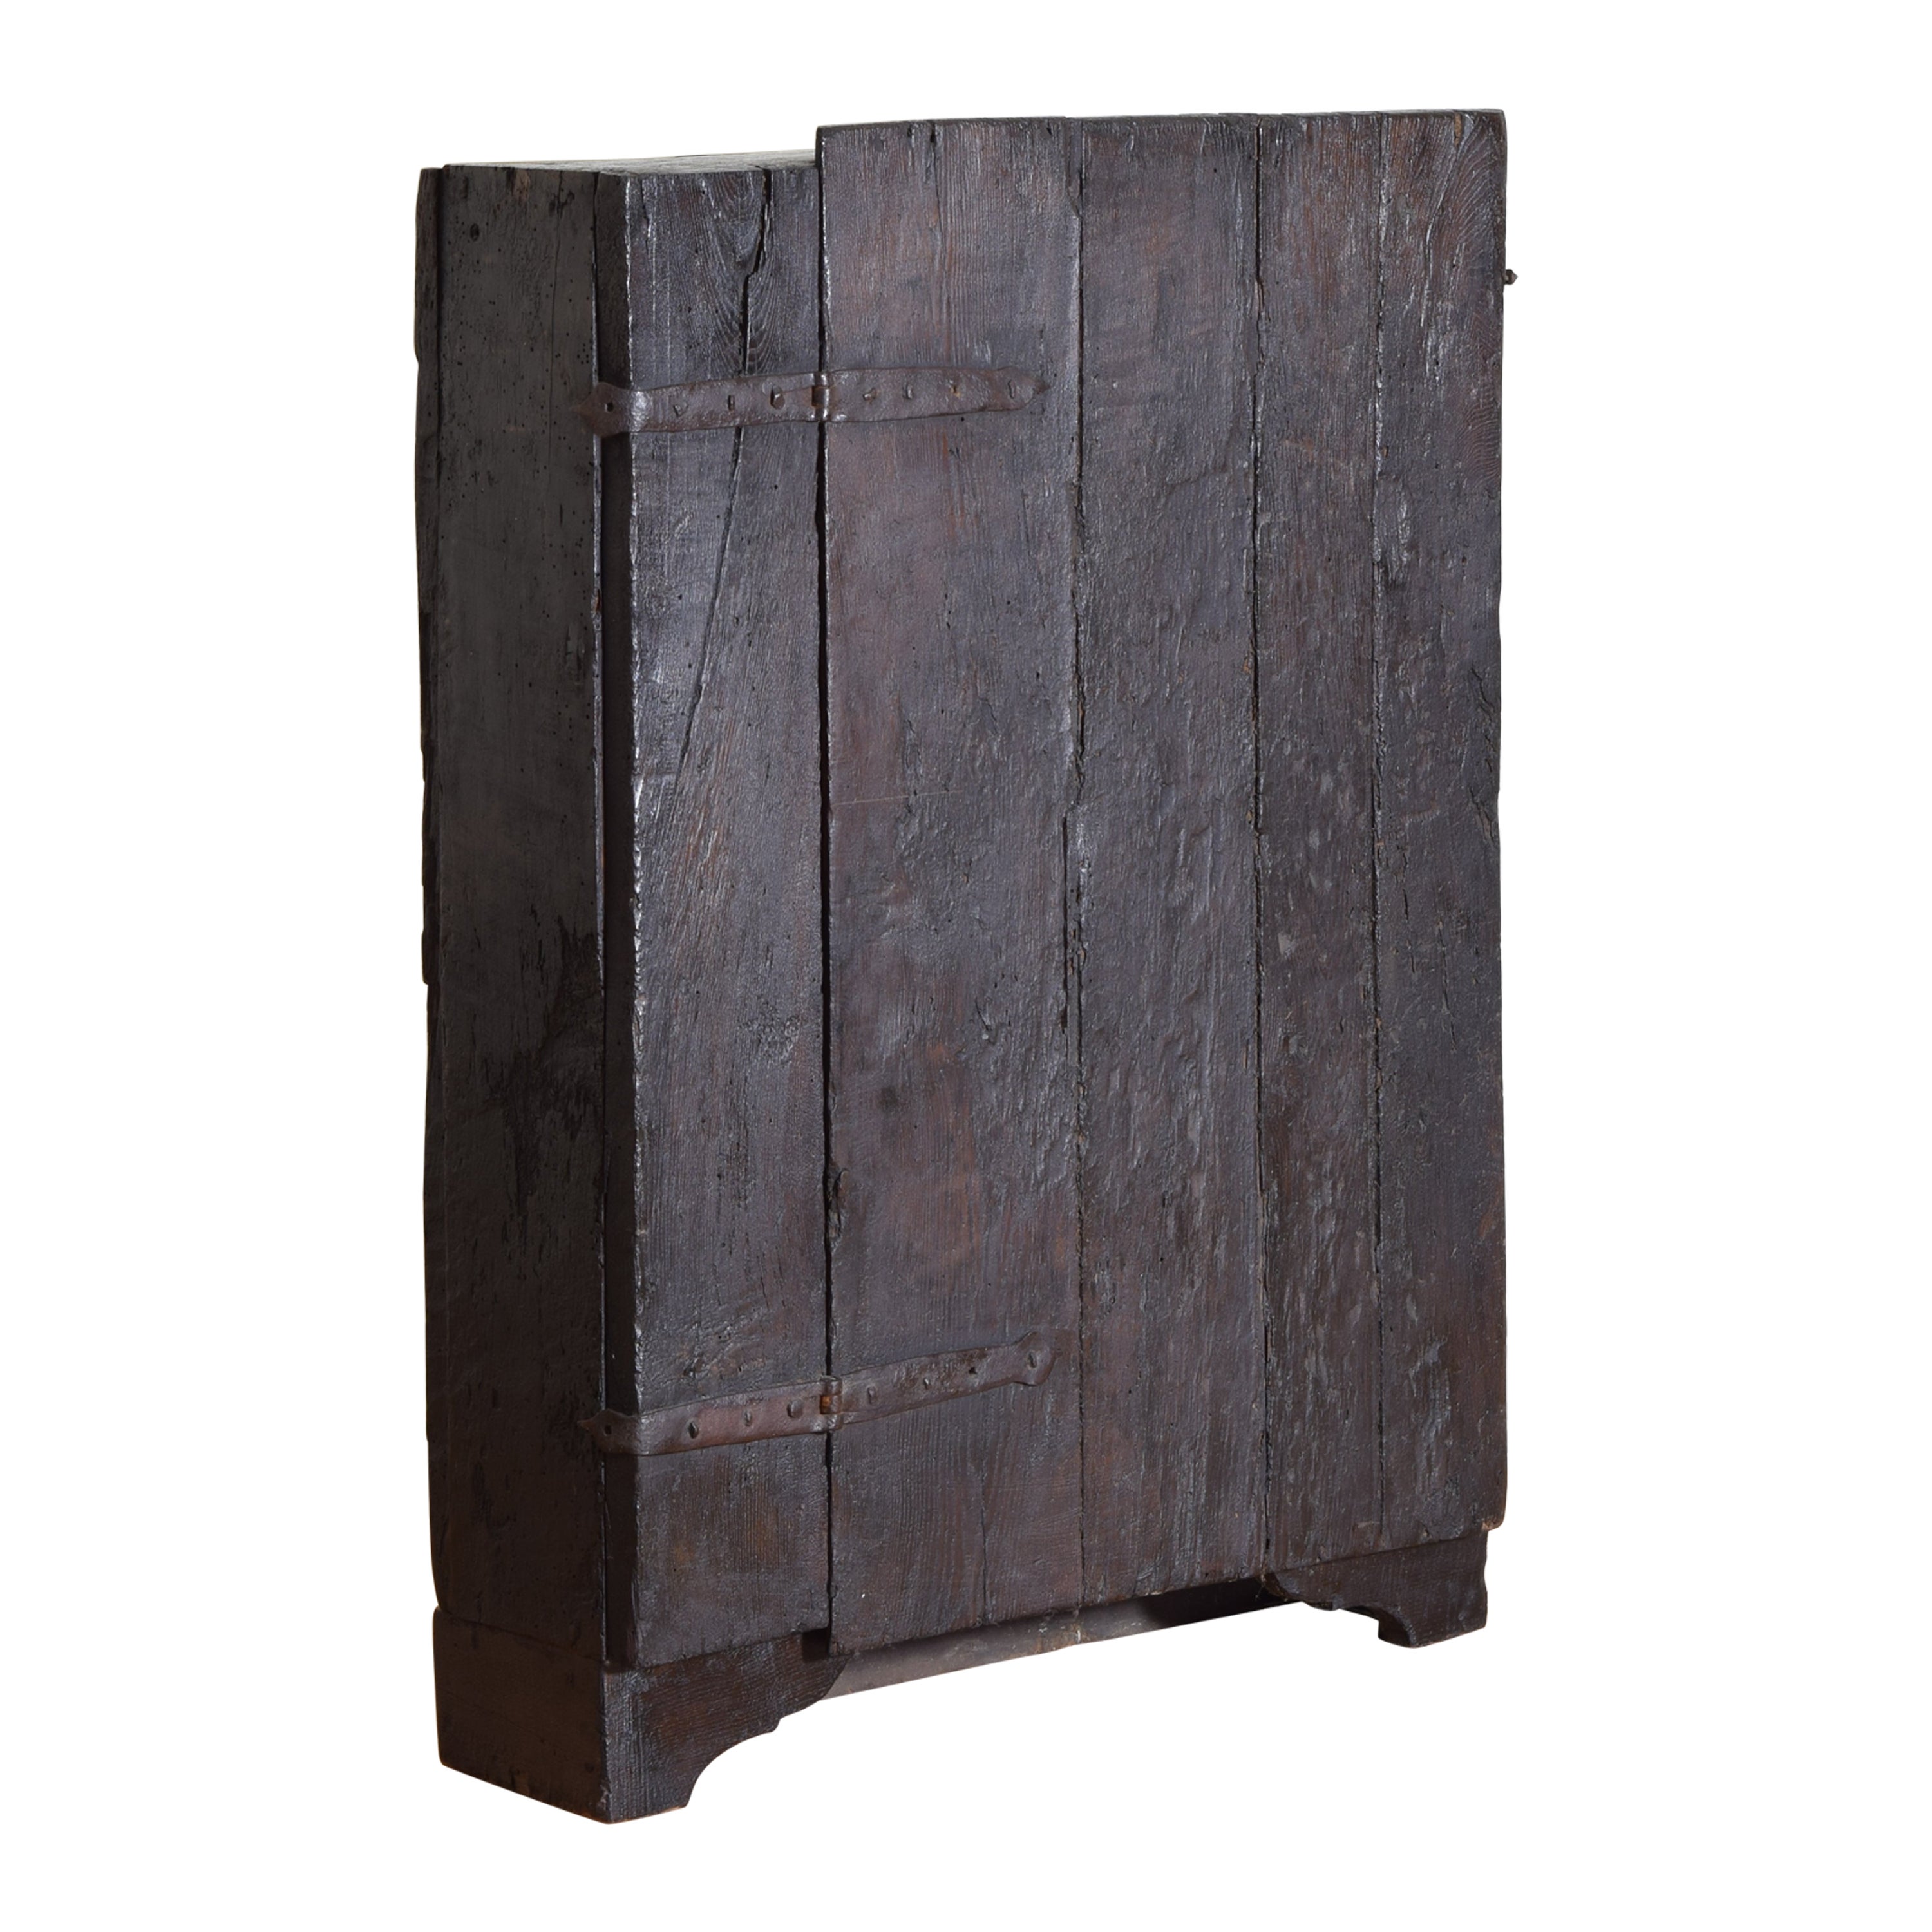 Italian Late Baroque Ebonized Oak 1-Door Footed Cabinet, early 18th cen. & later For Sale